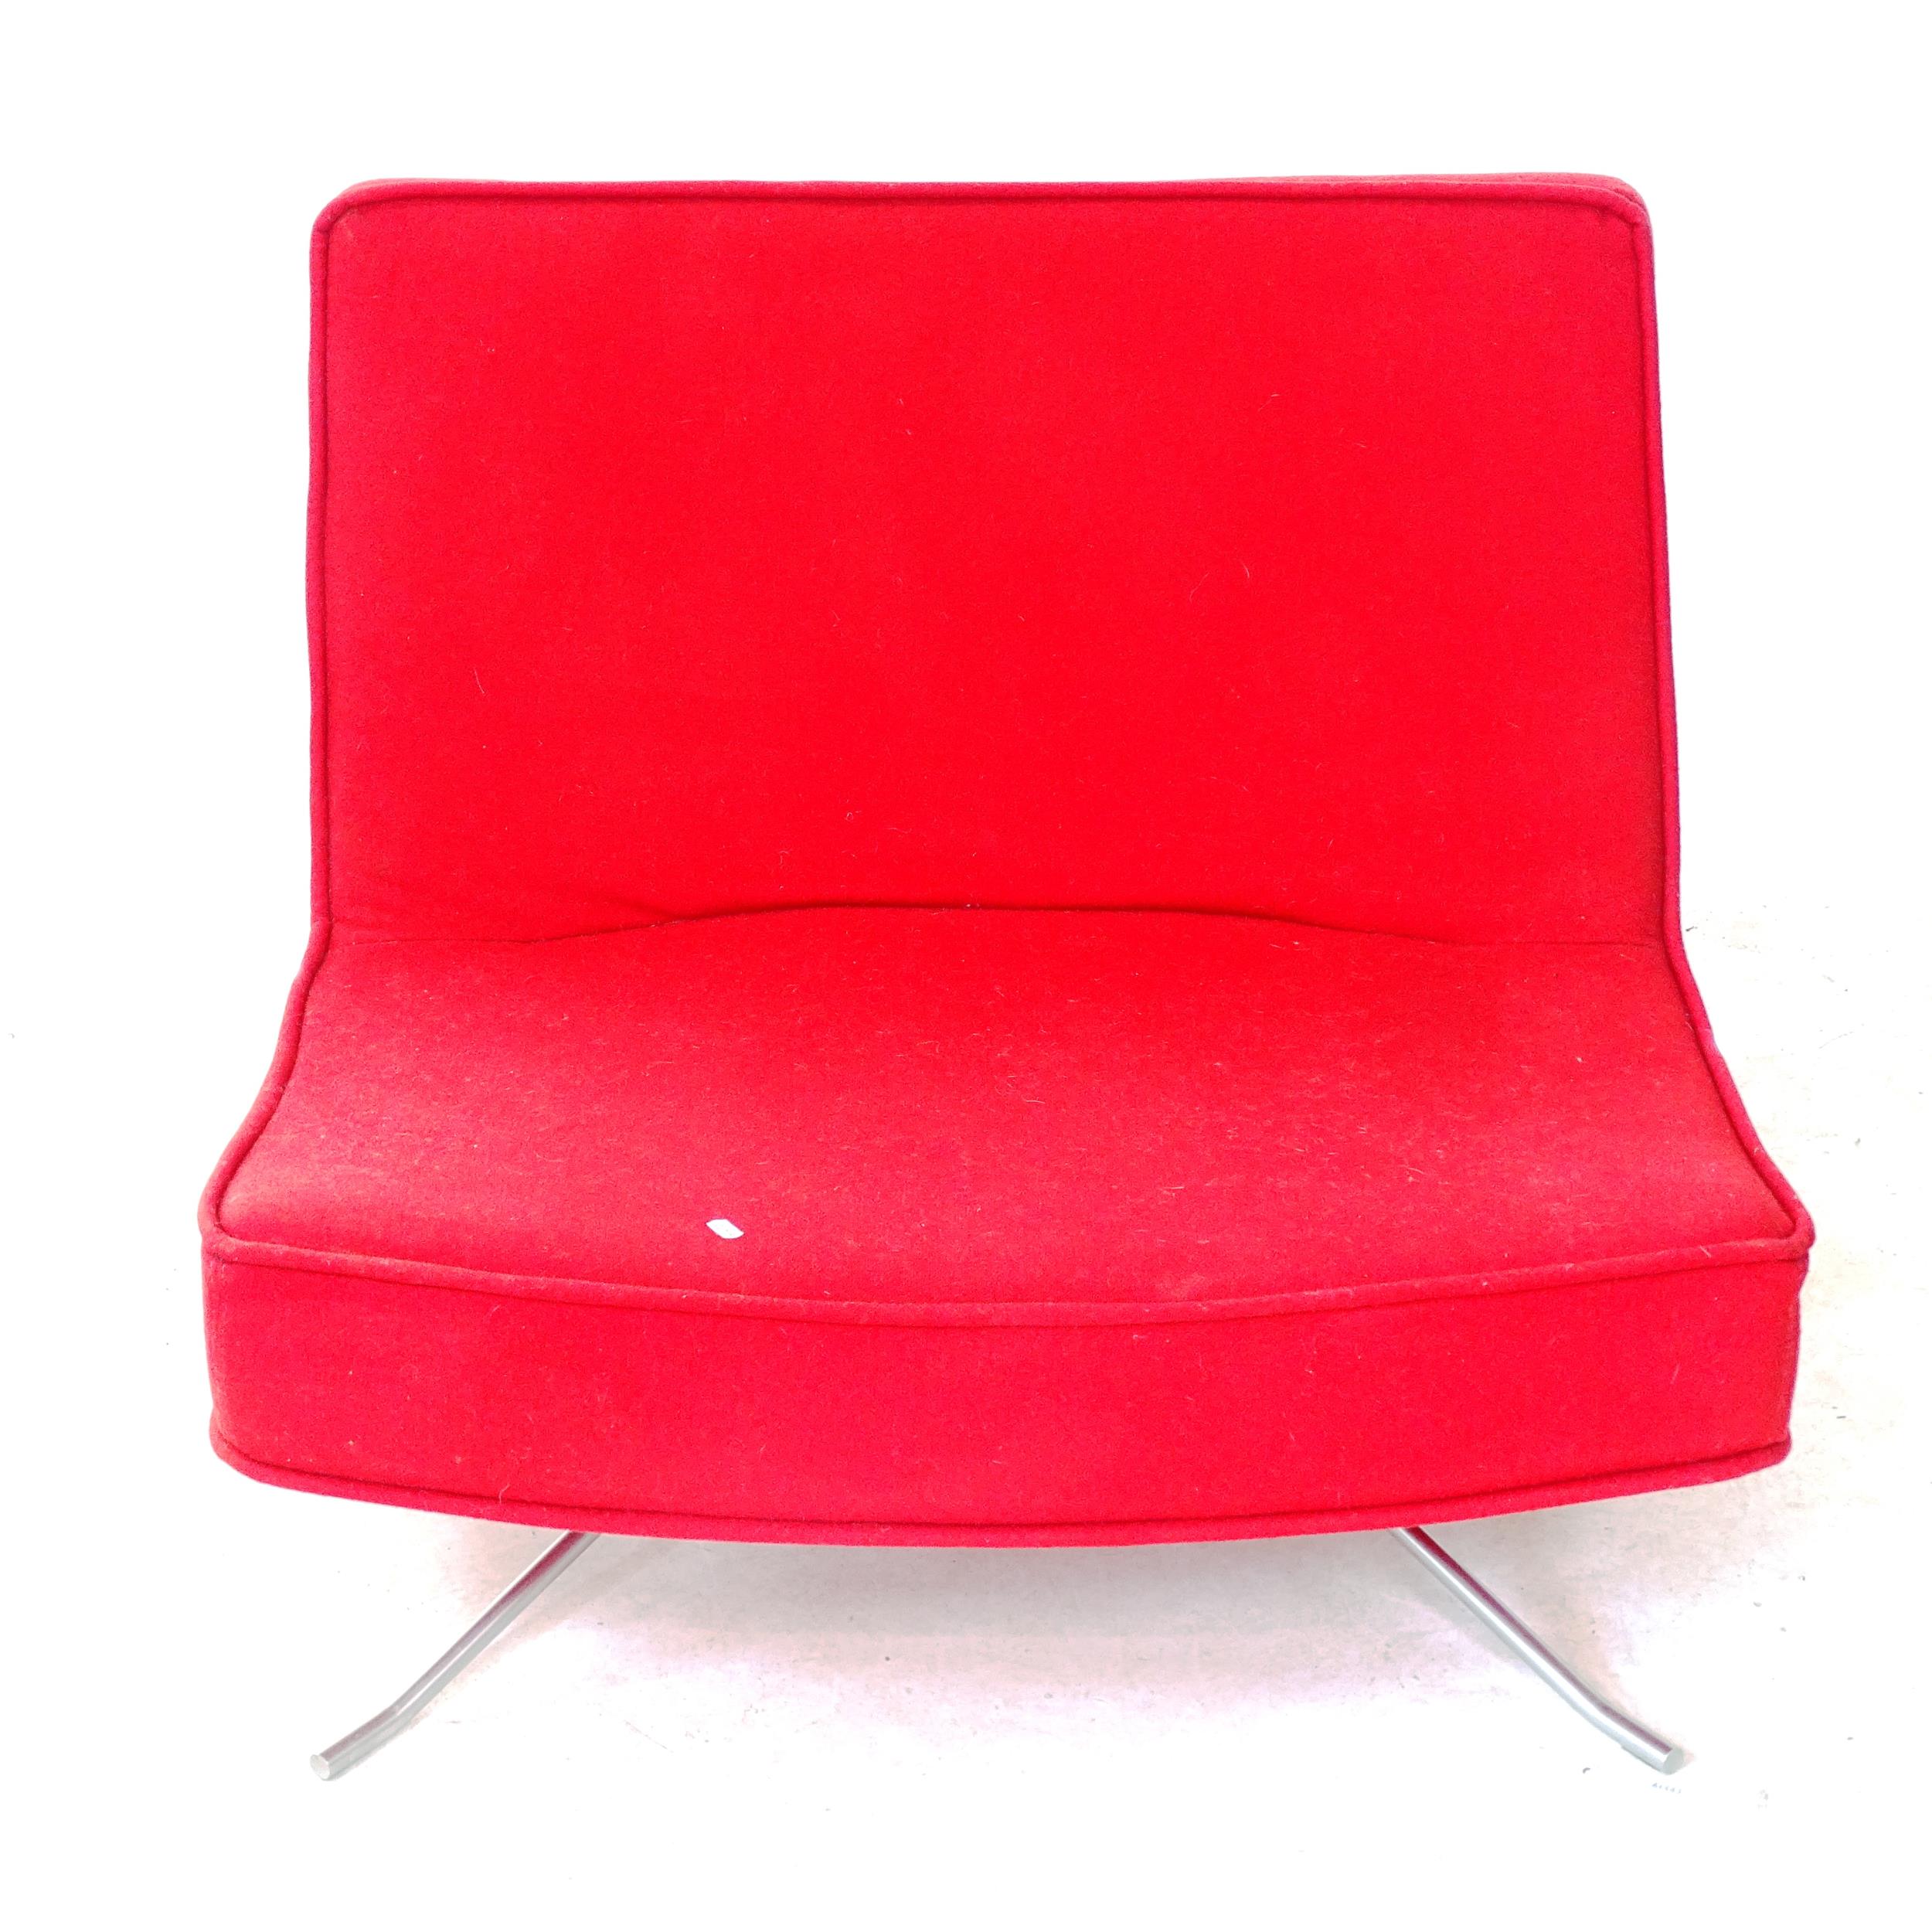 A Pop lounge chair by Christian Werner for Ligne Roset, upholstered with red Kvadrat fabric, on 4-